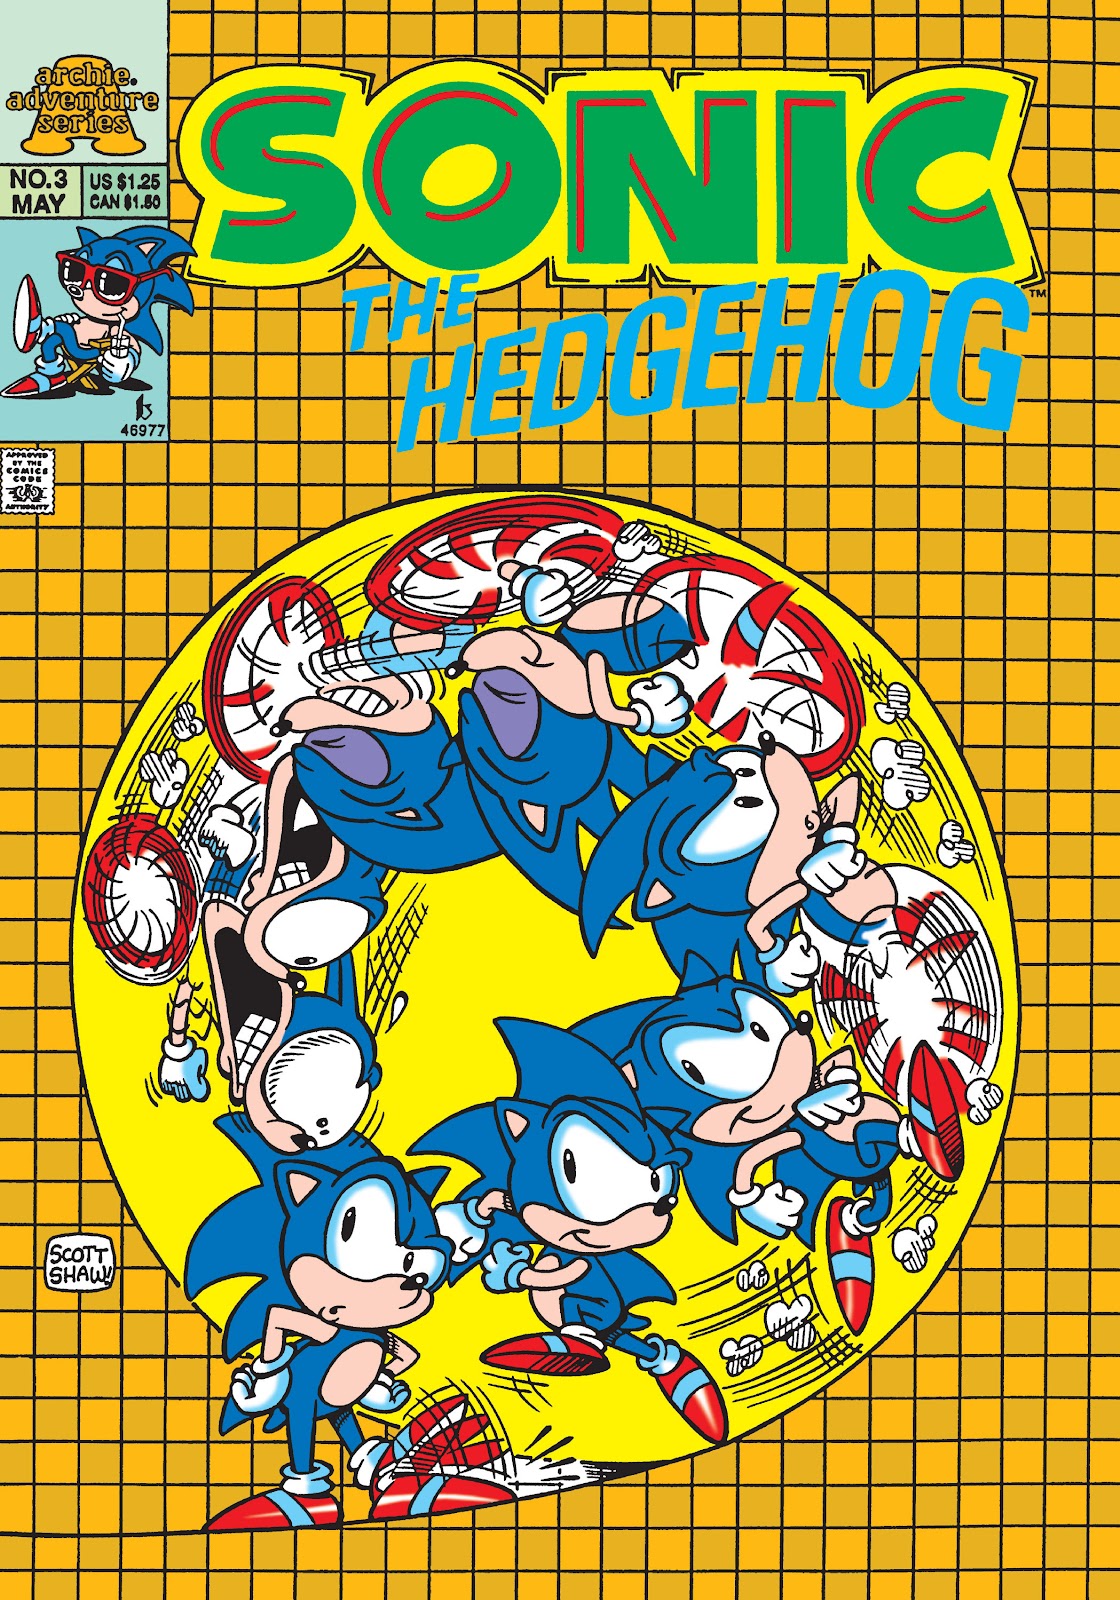 Sonic the Hedgehog (mini) issue 3 - Page 1